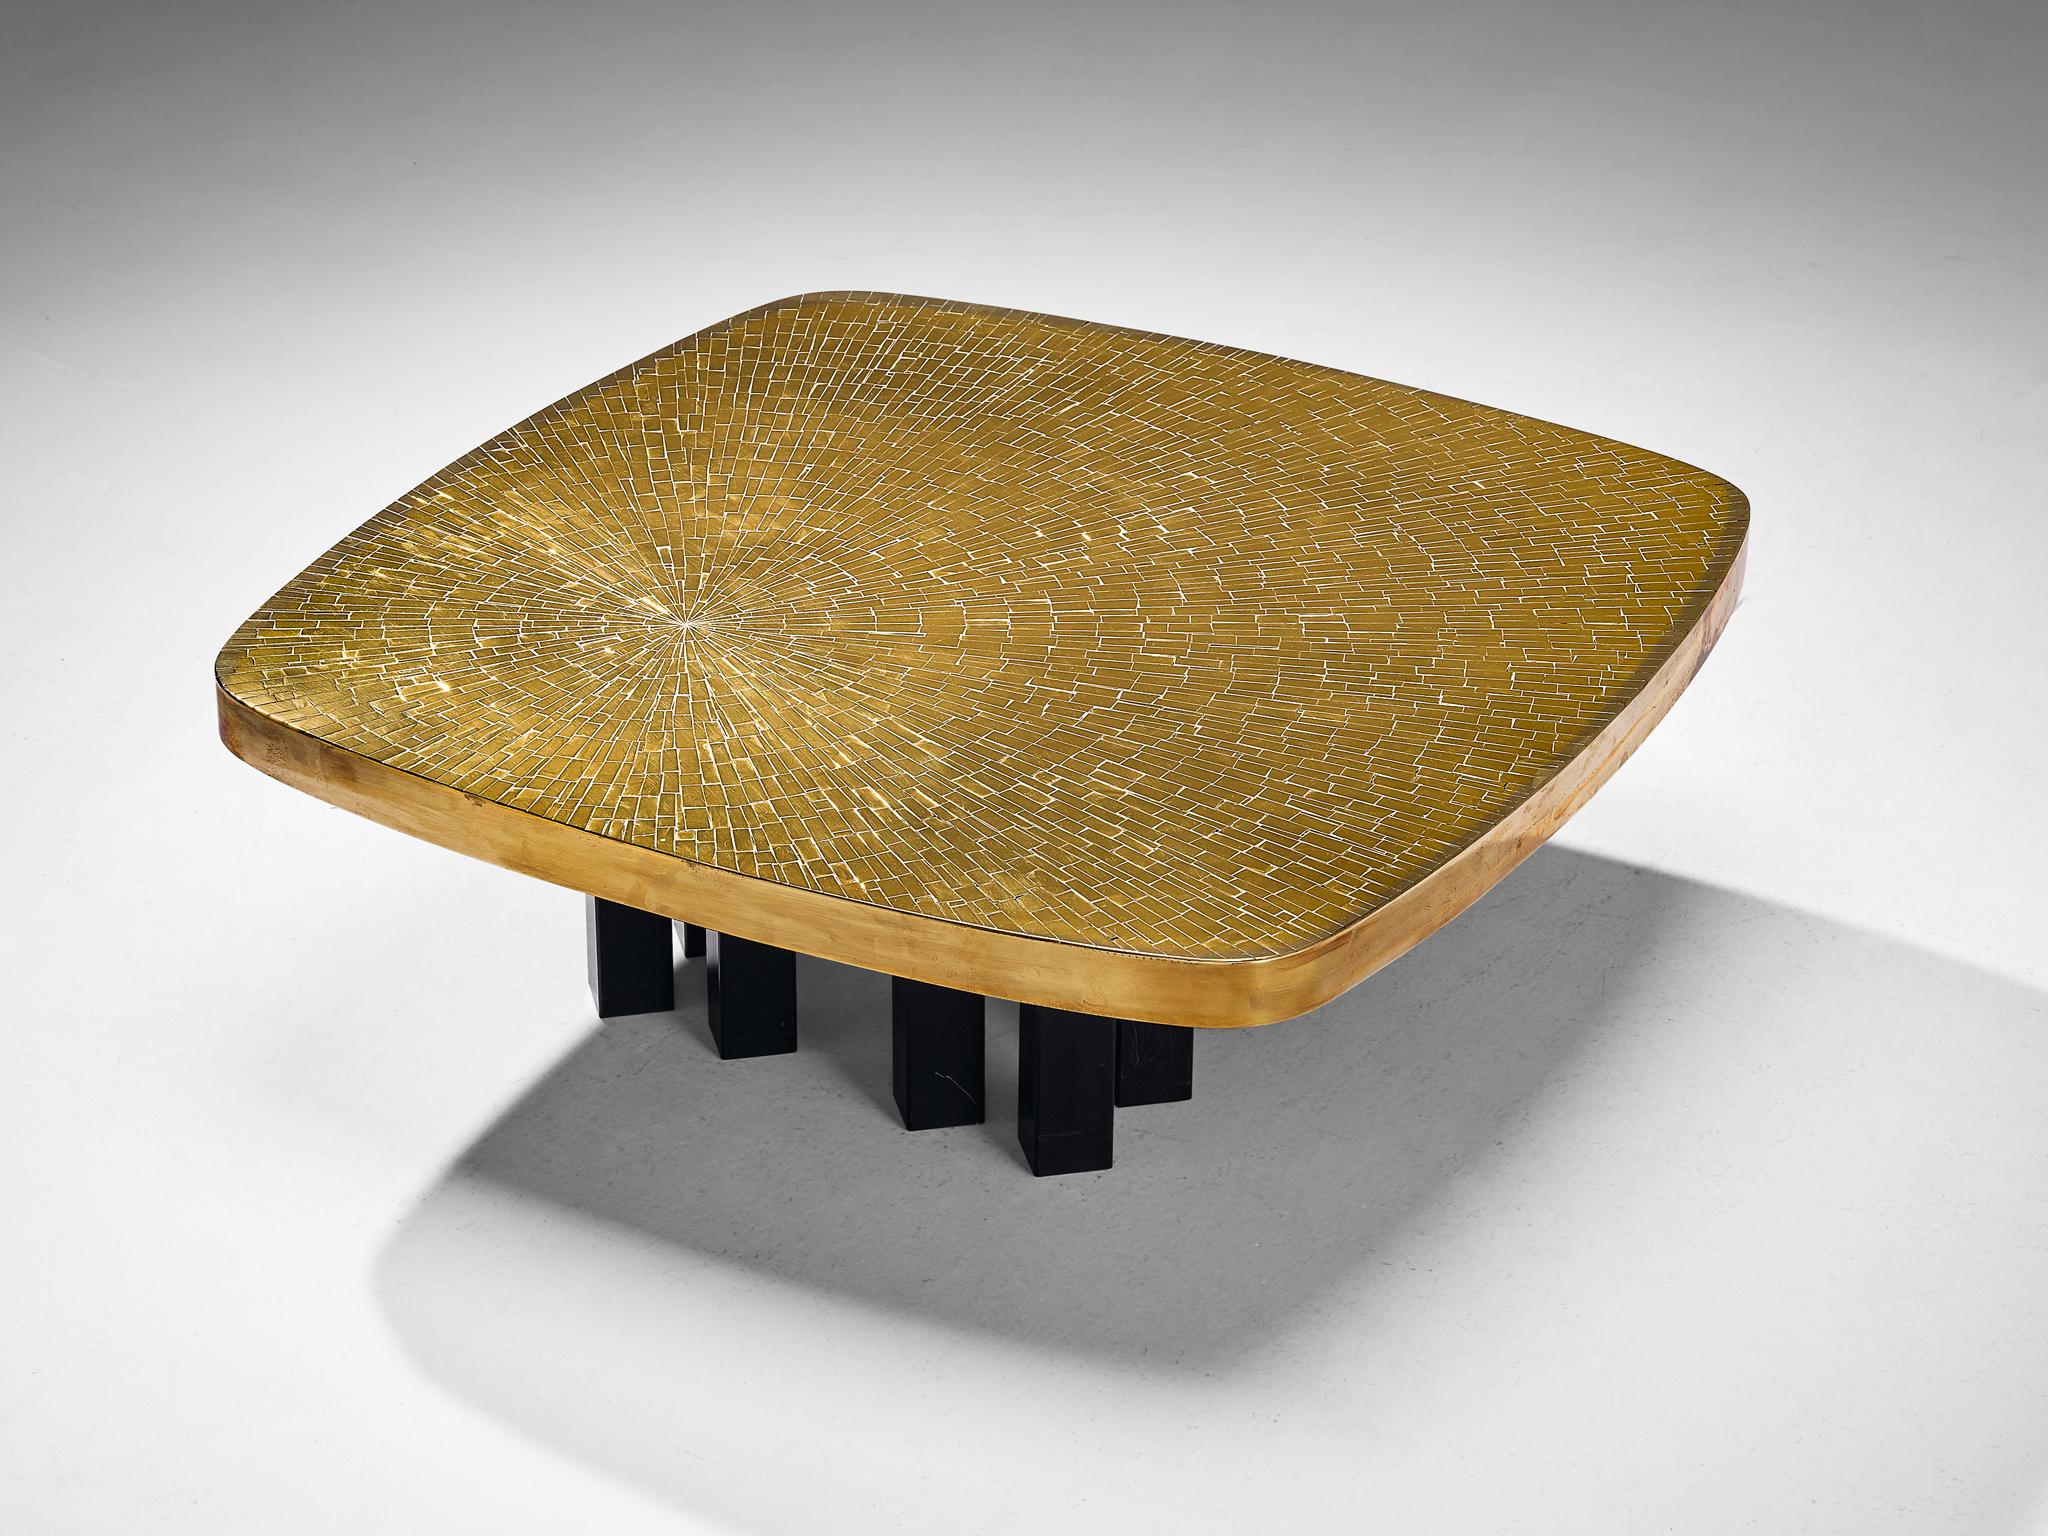 Jean Claude Dresse, coffee table, brass and steel, Belgium, 1970s

Enchanting coffee table designed by Belgian artist Jean Claude Dresse in the 1970s. This square table with rounded edges is easily recognizable as a design of Dresse, displaying high